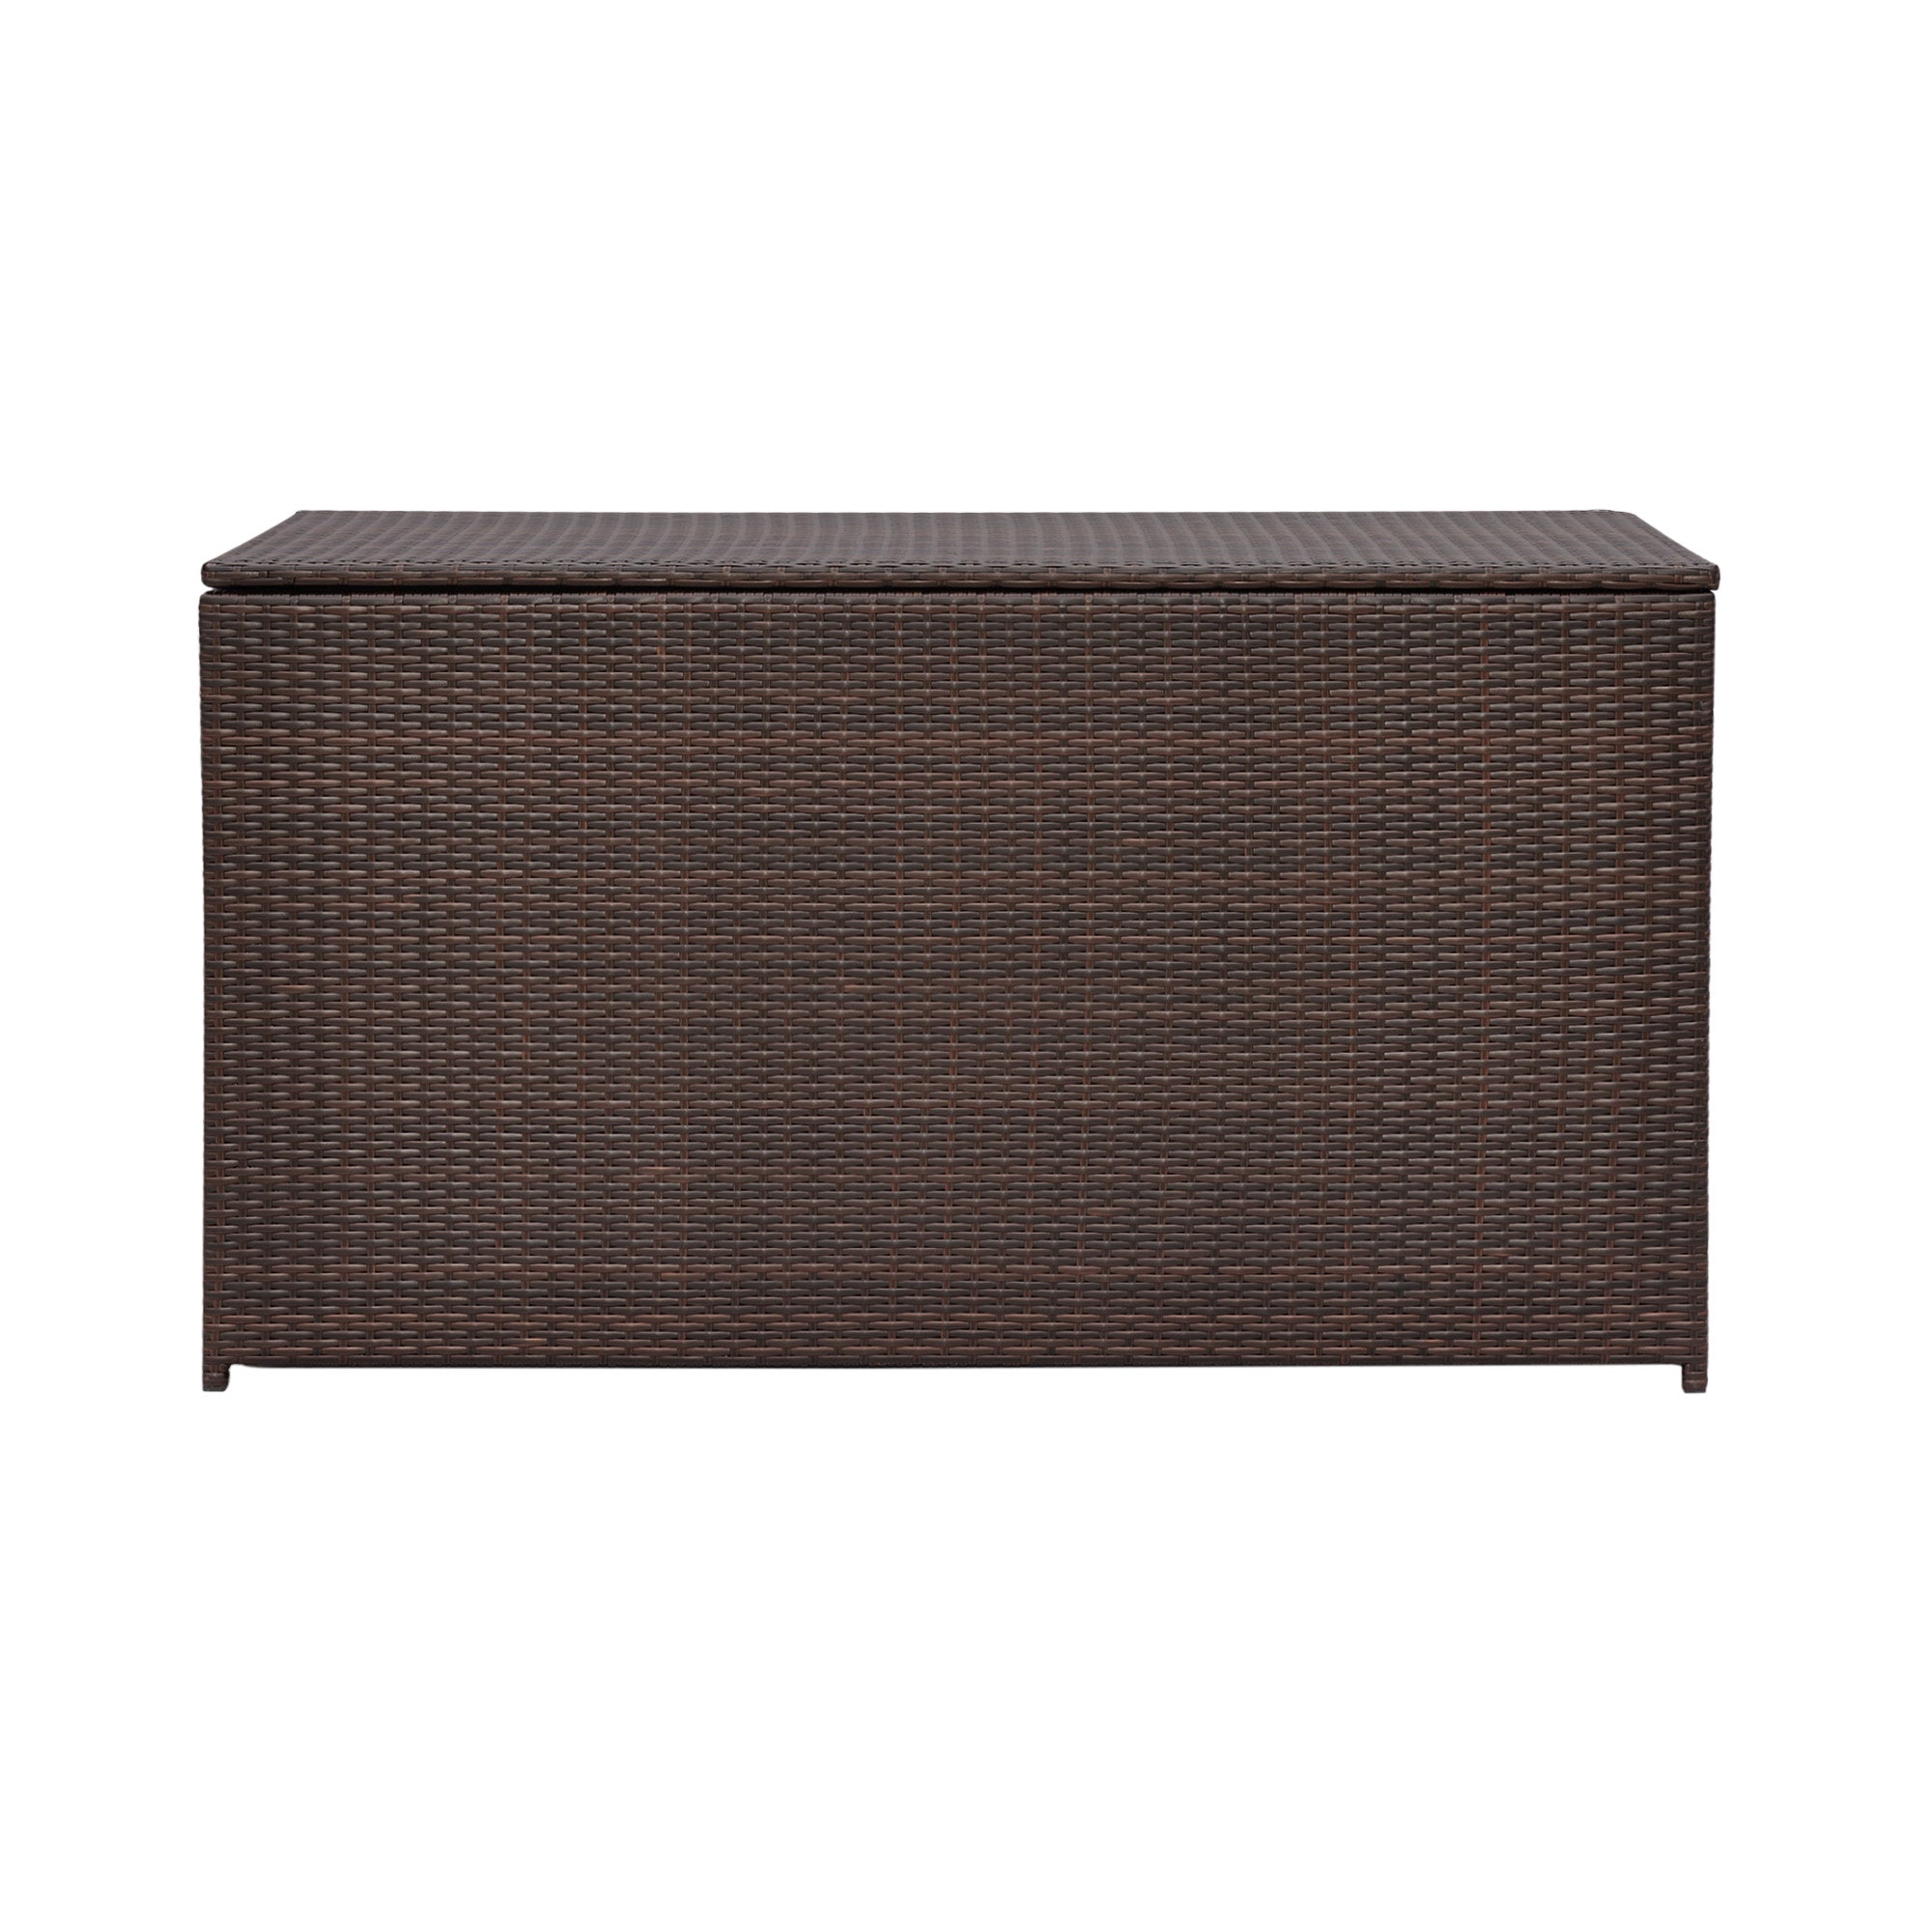 Teamson Home Wicker 154 Gallon Outdoor Deck Box for Cushions or Pool Accessory Storage, Brown